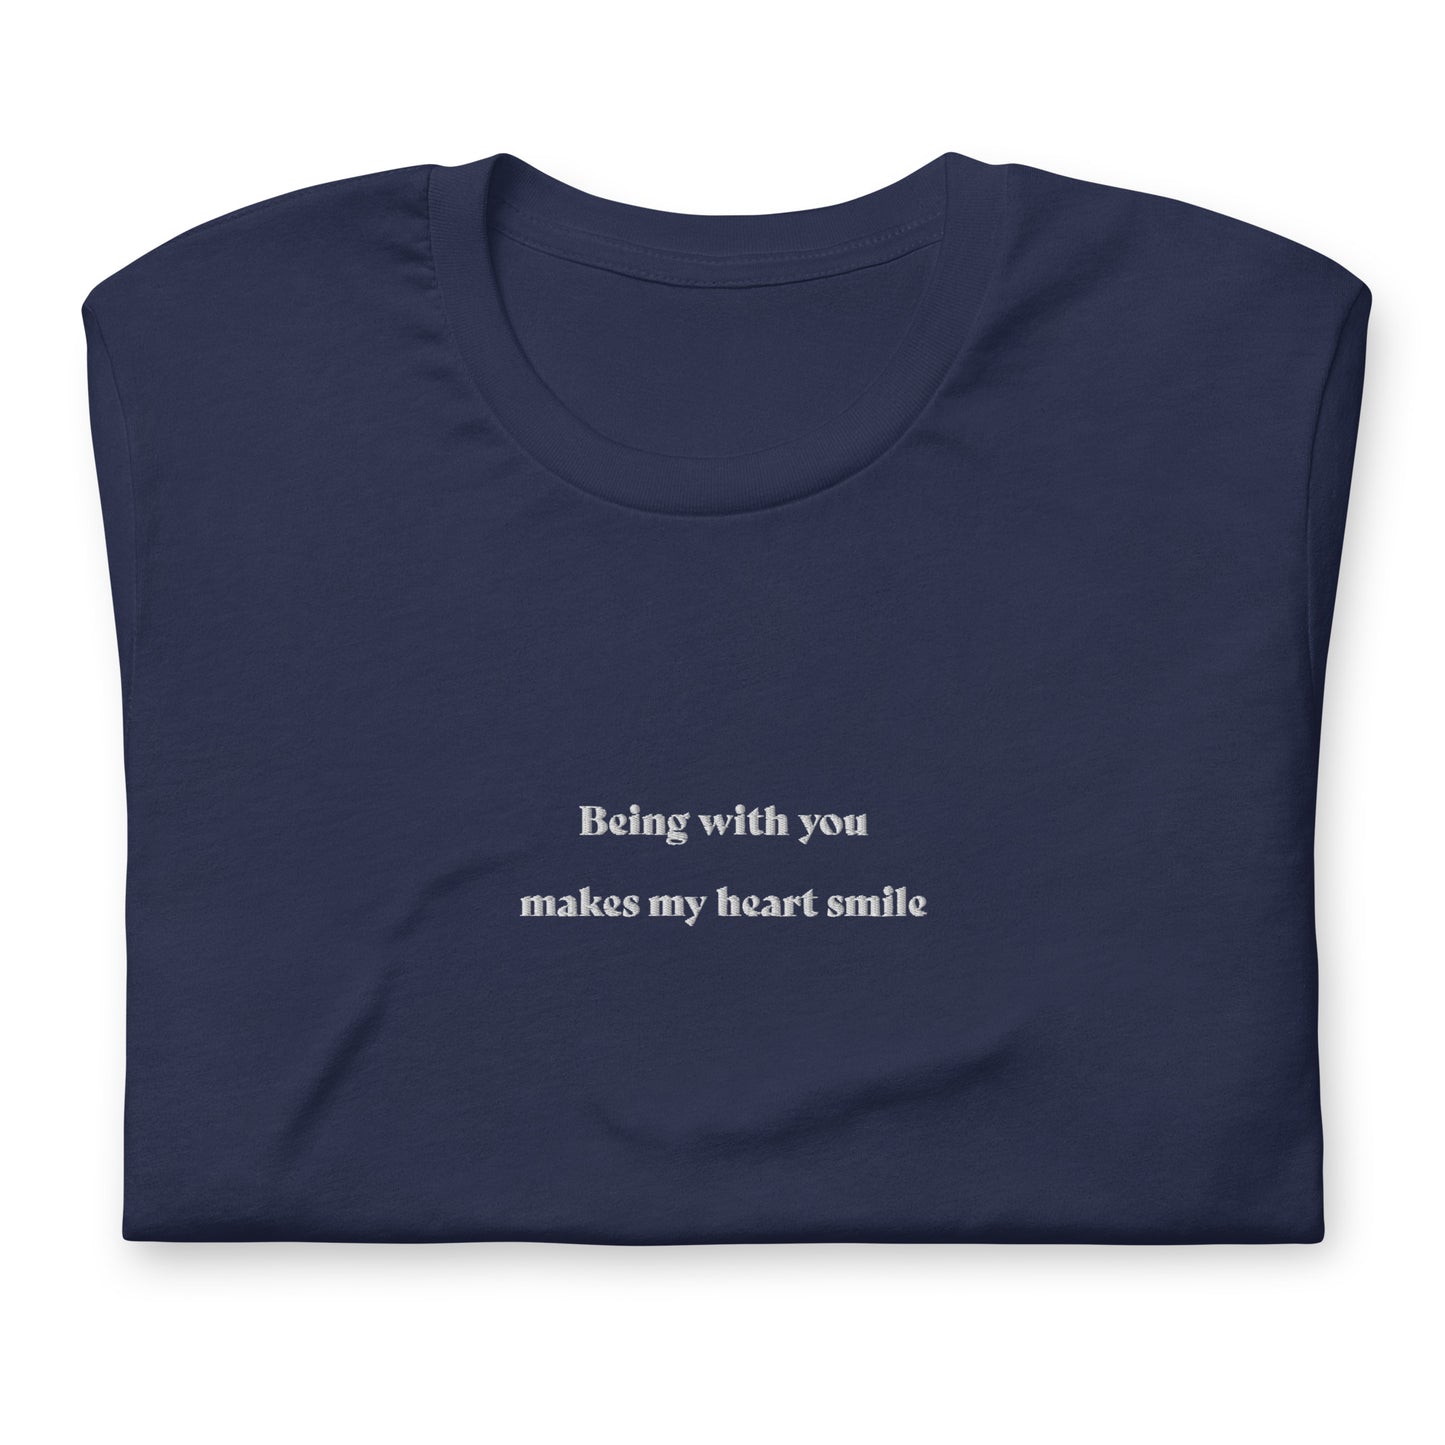 Being with you makes my heart smile - besticktes T-Shirt